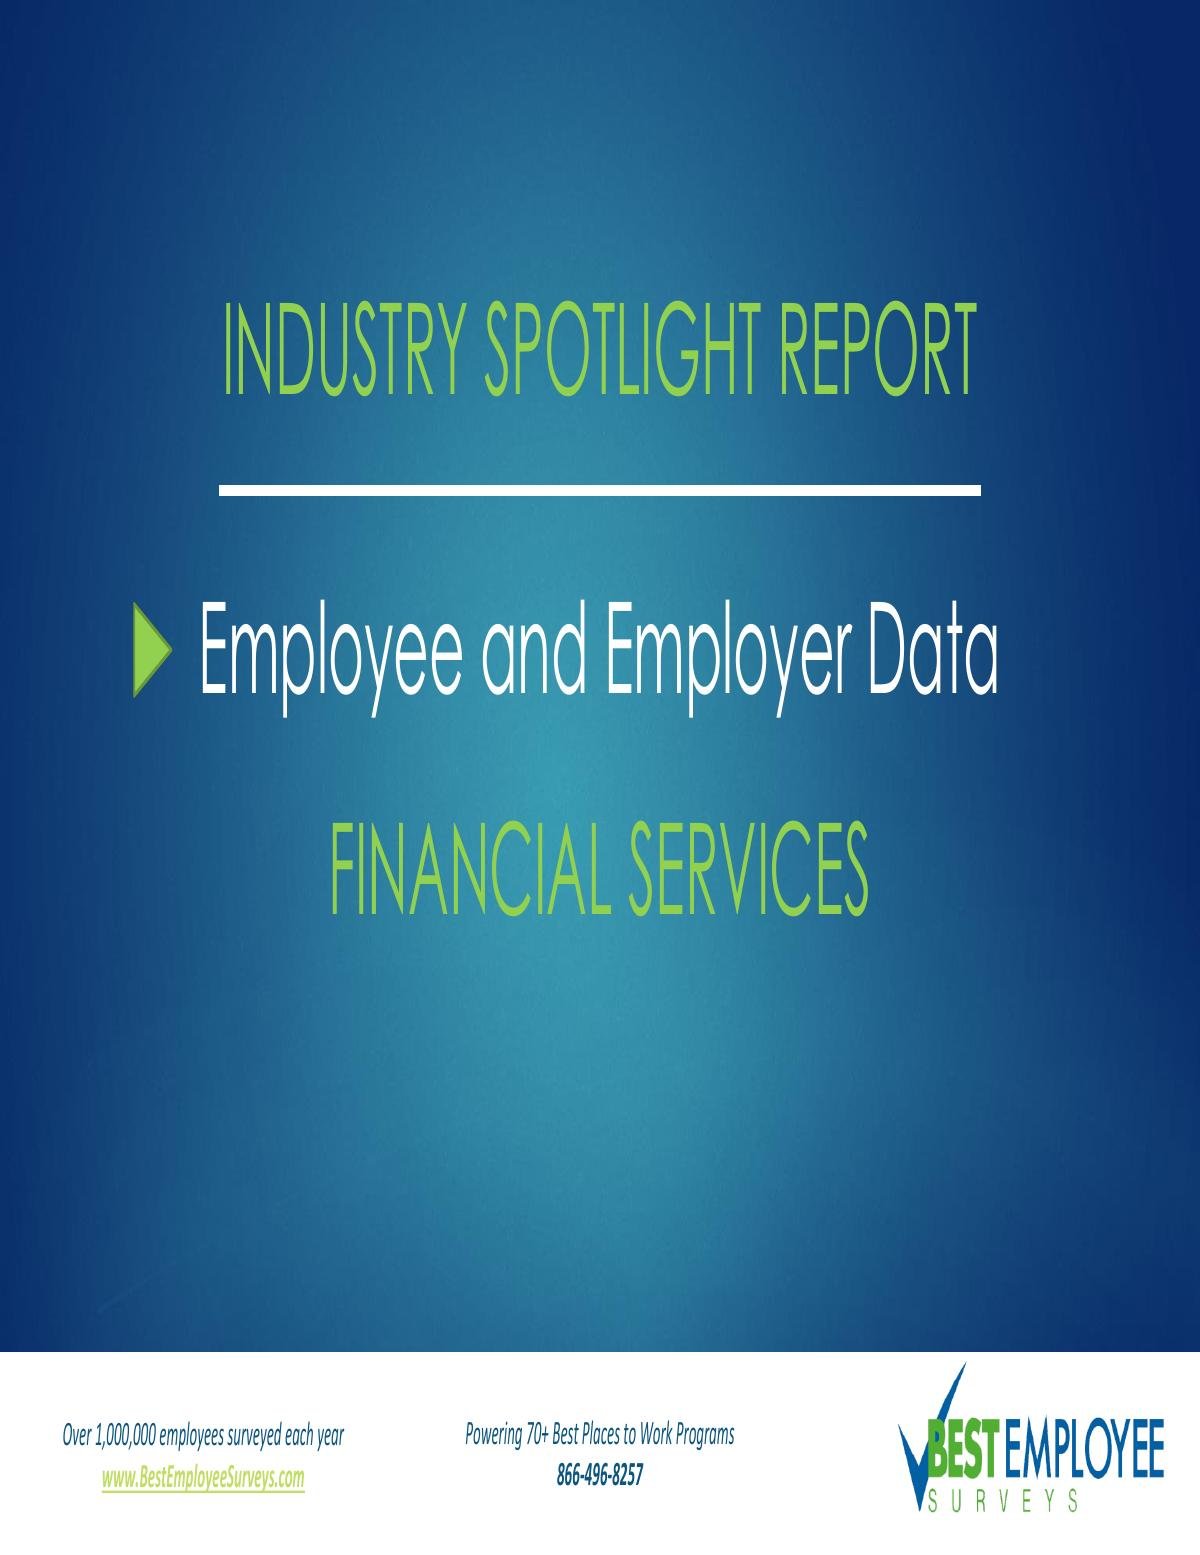 2019 Employee Engagement and Satisfaction Report: Financial Services